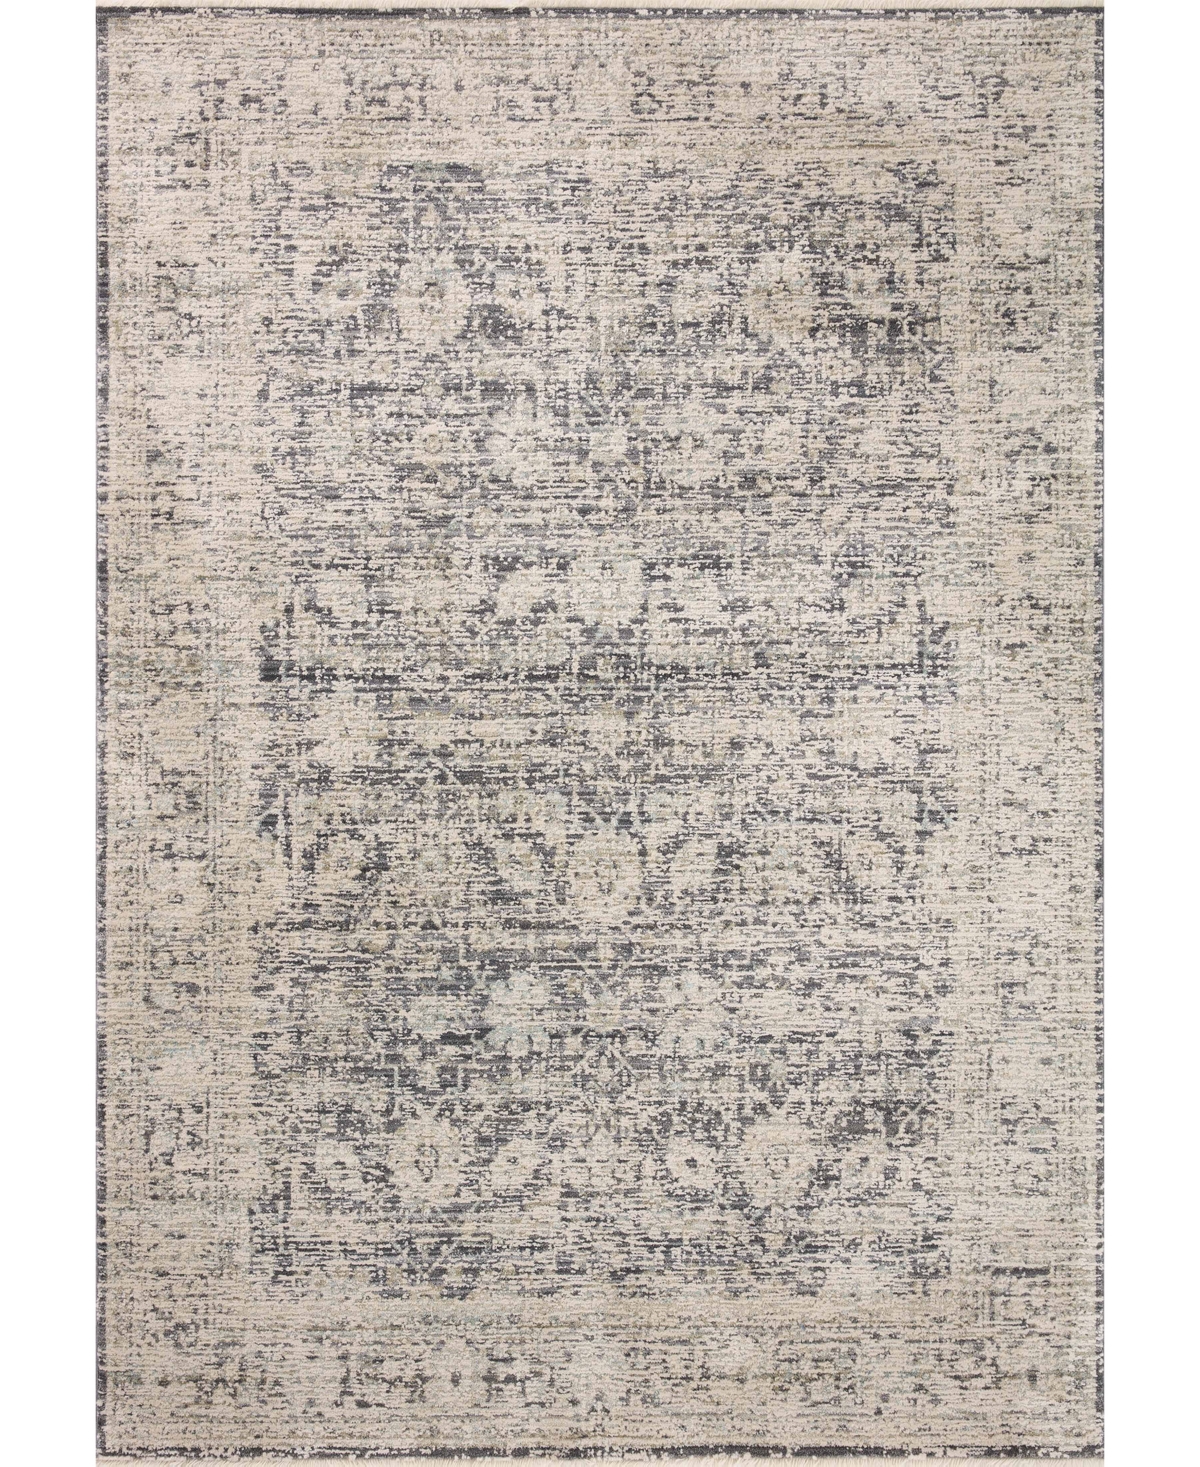 Amber Lewis X Loloi Alie Ale-05 2'3" X 3'10" Area Rug In Charcoal